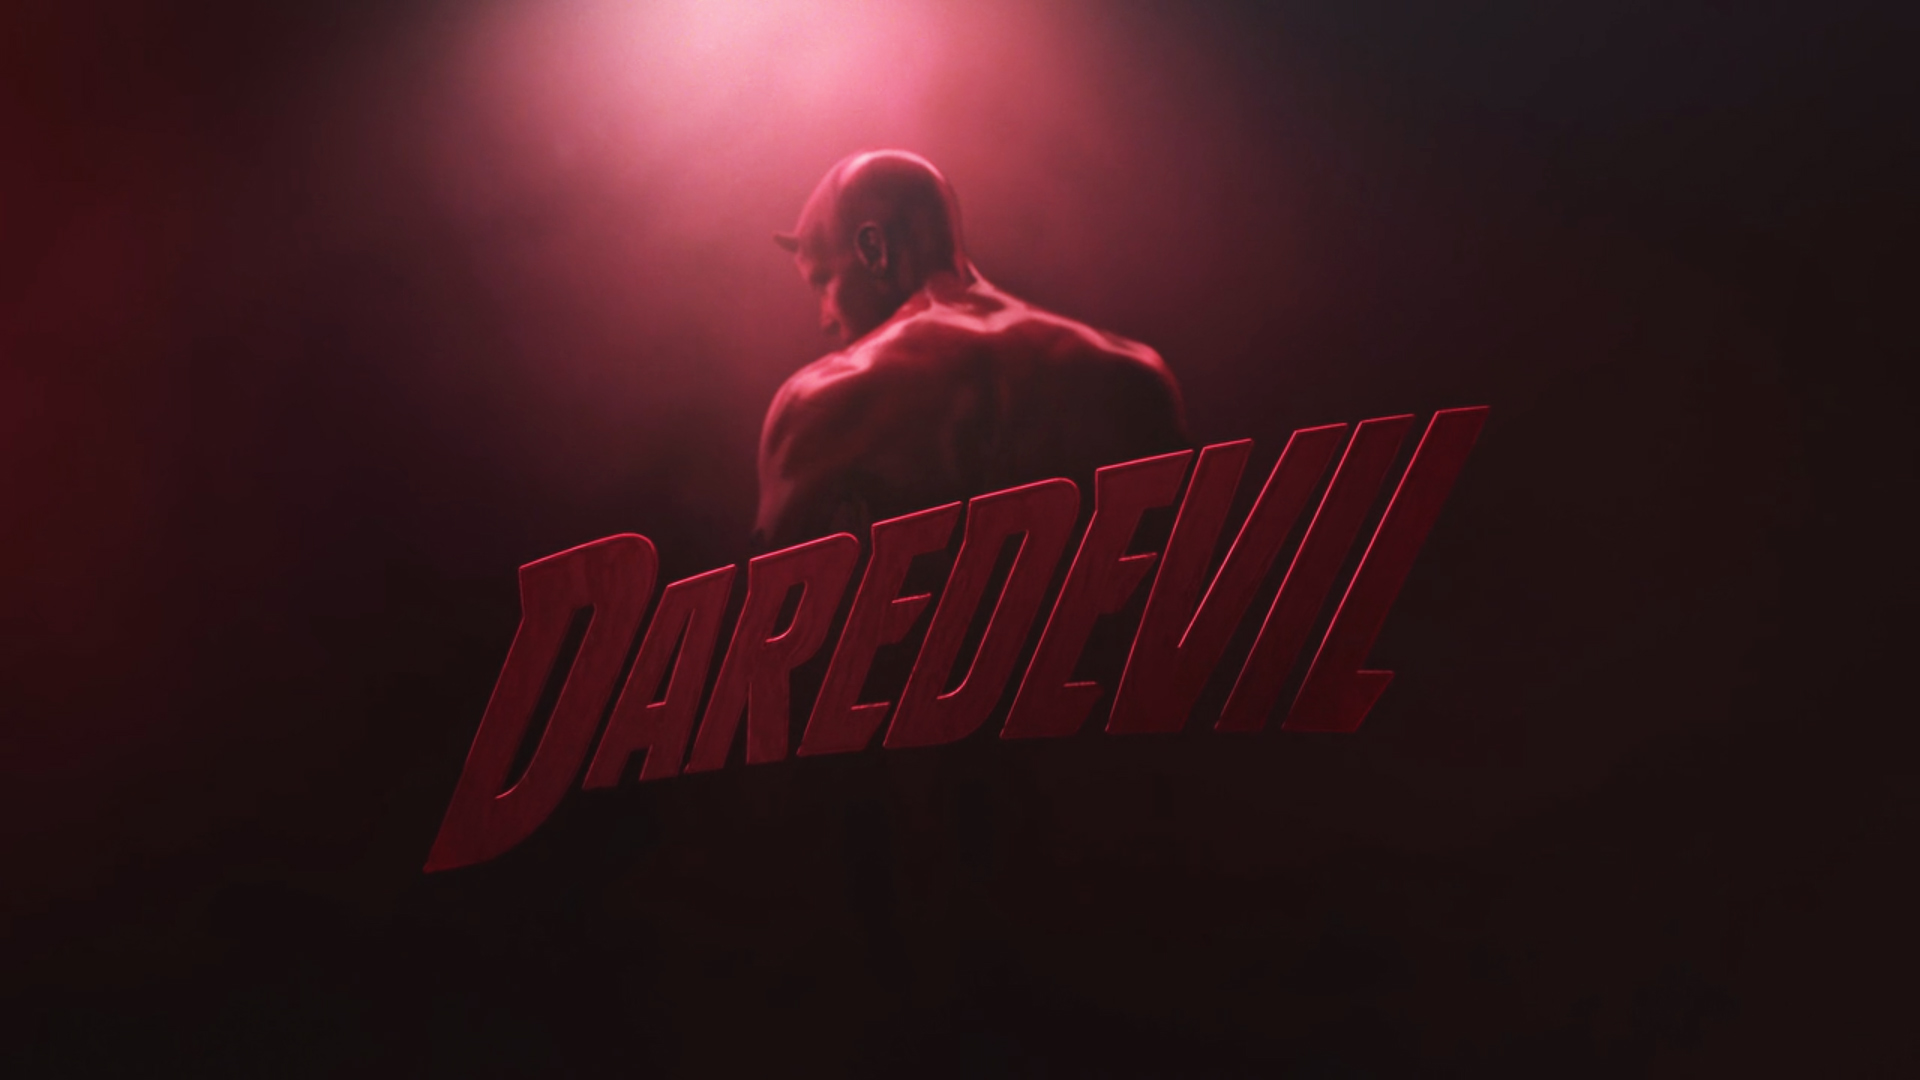 Daredevil Nearly Christiannearly Christian